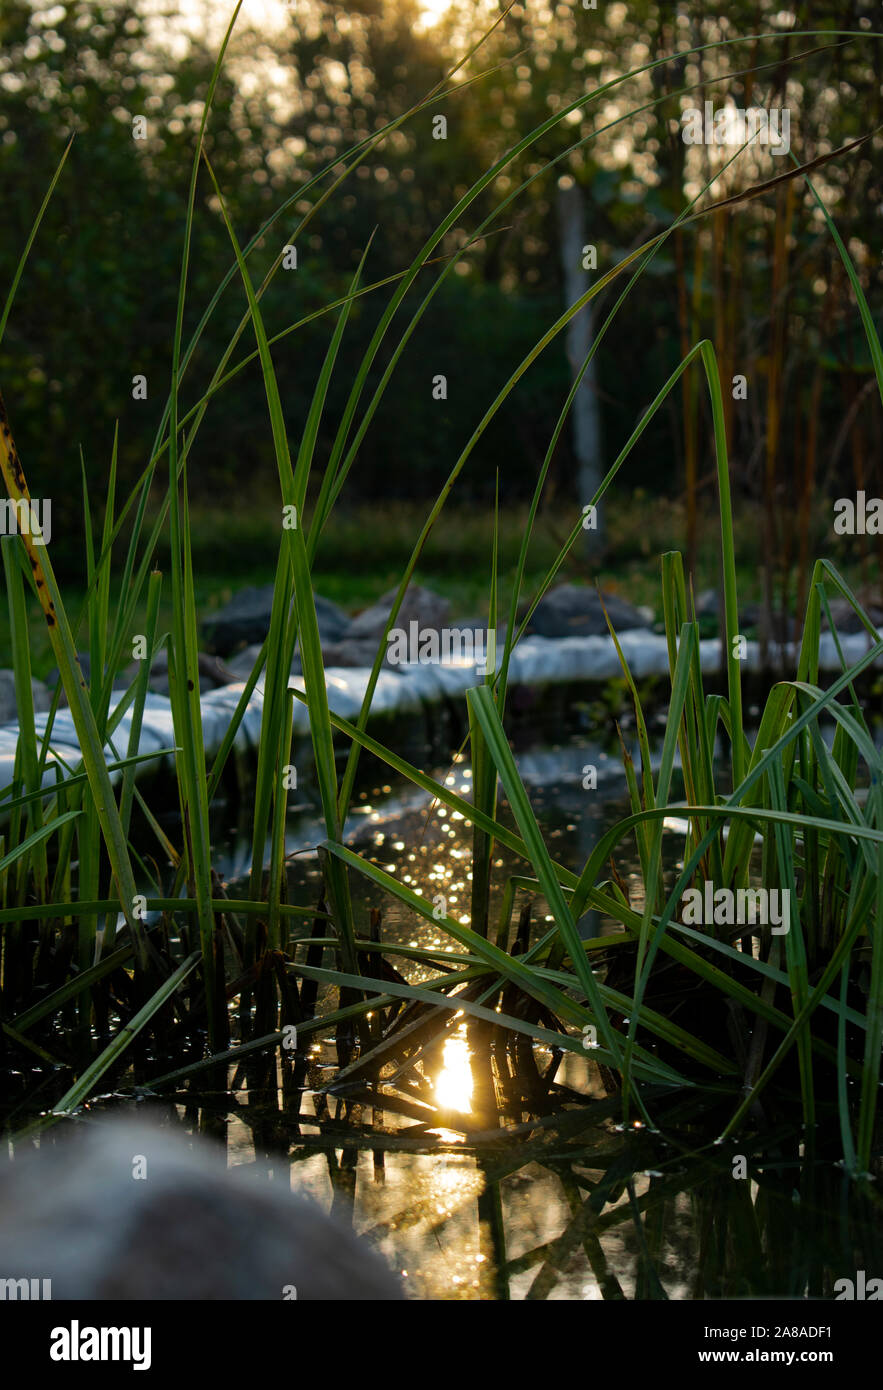 Fish pond with sun reflection Stock Photo